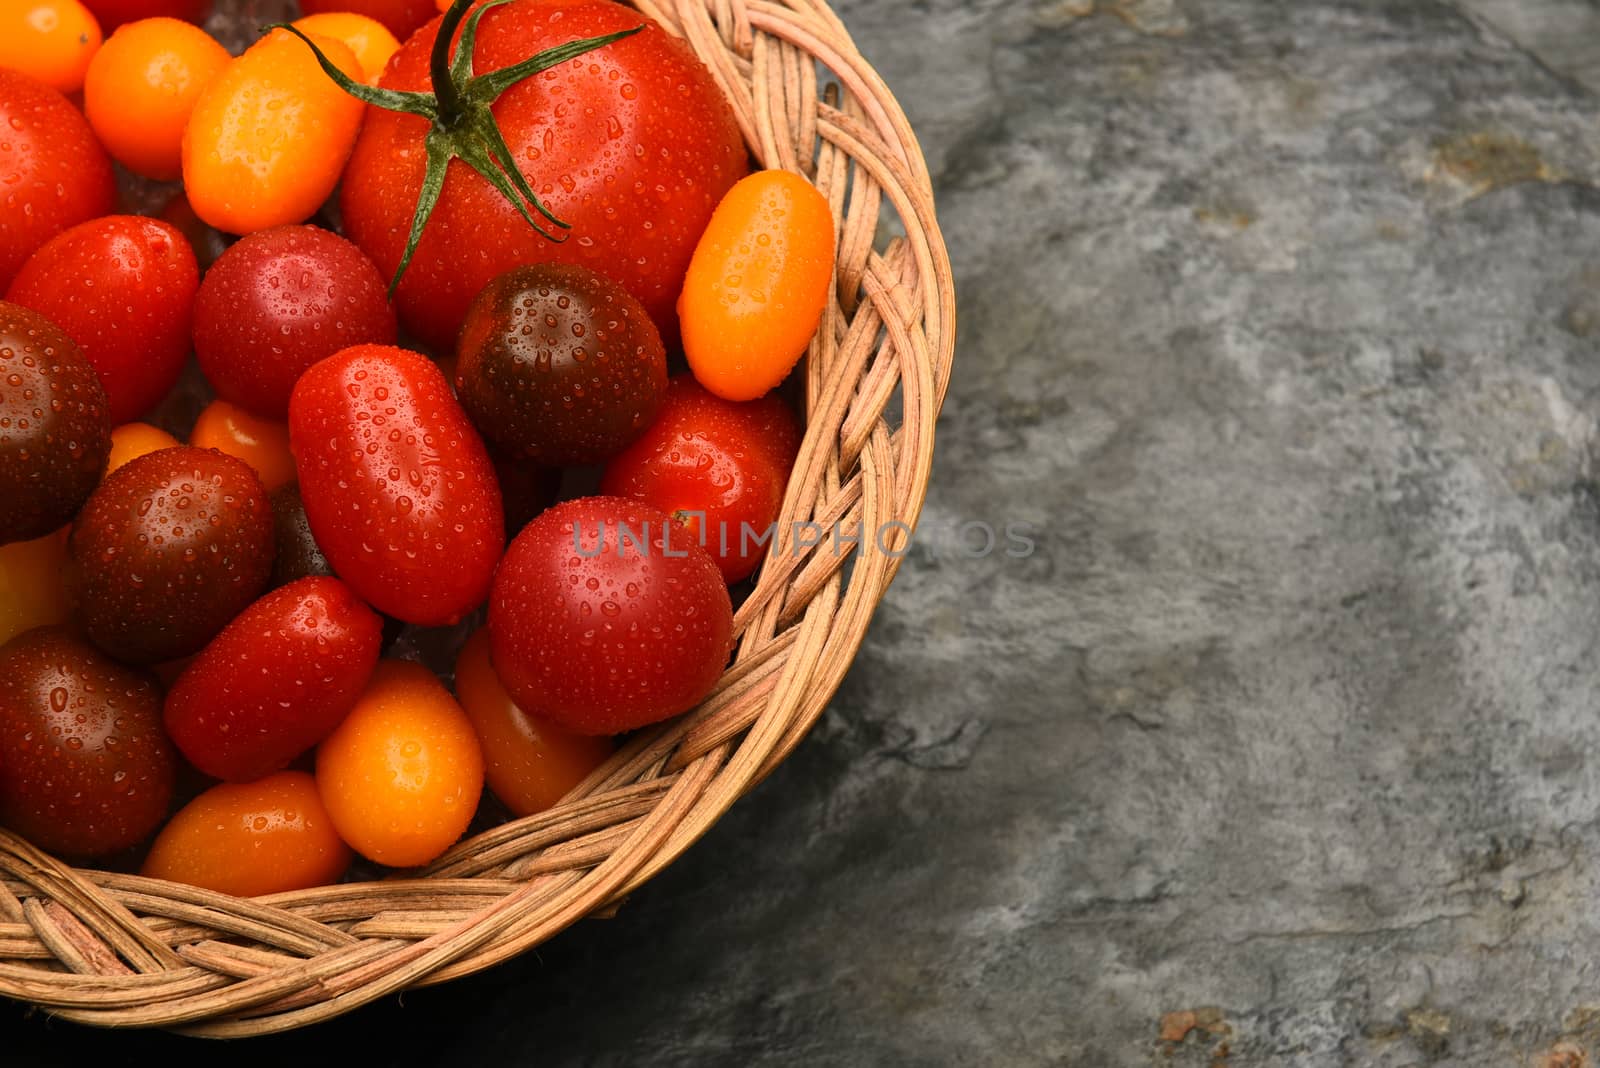 Top view of a basket filled with a variety of medley tomatoes. Horizontal format with copy space.